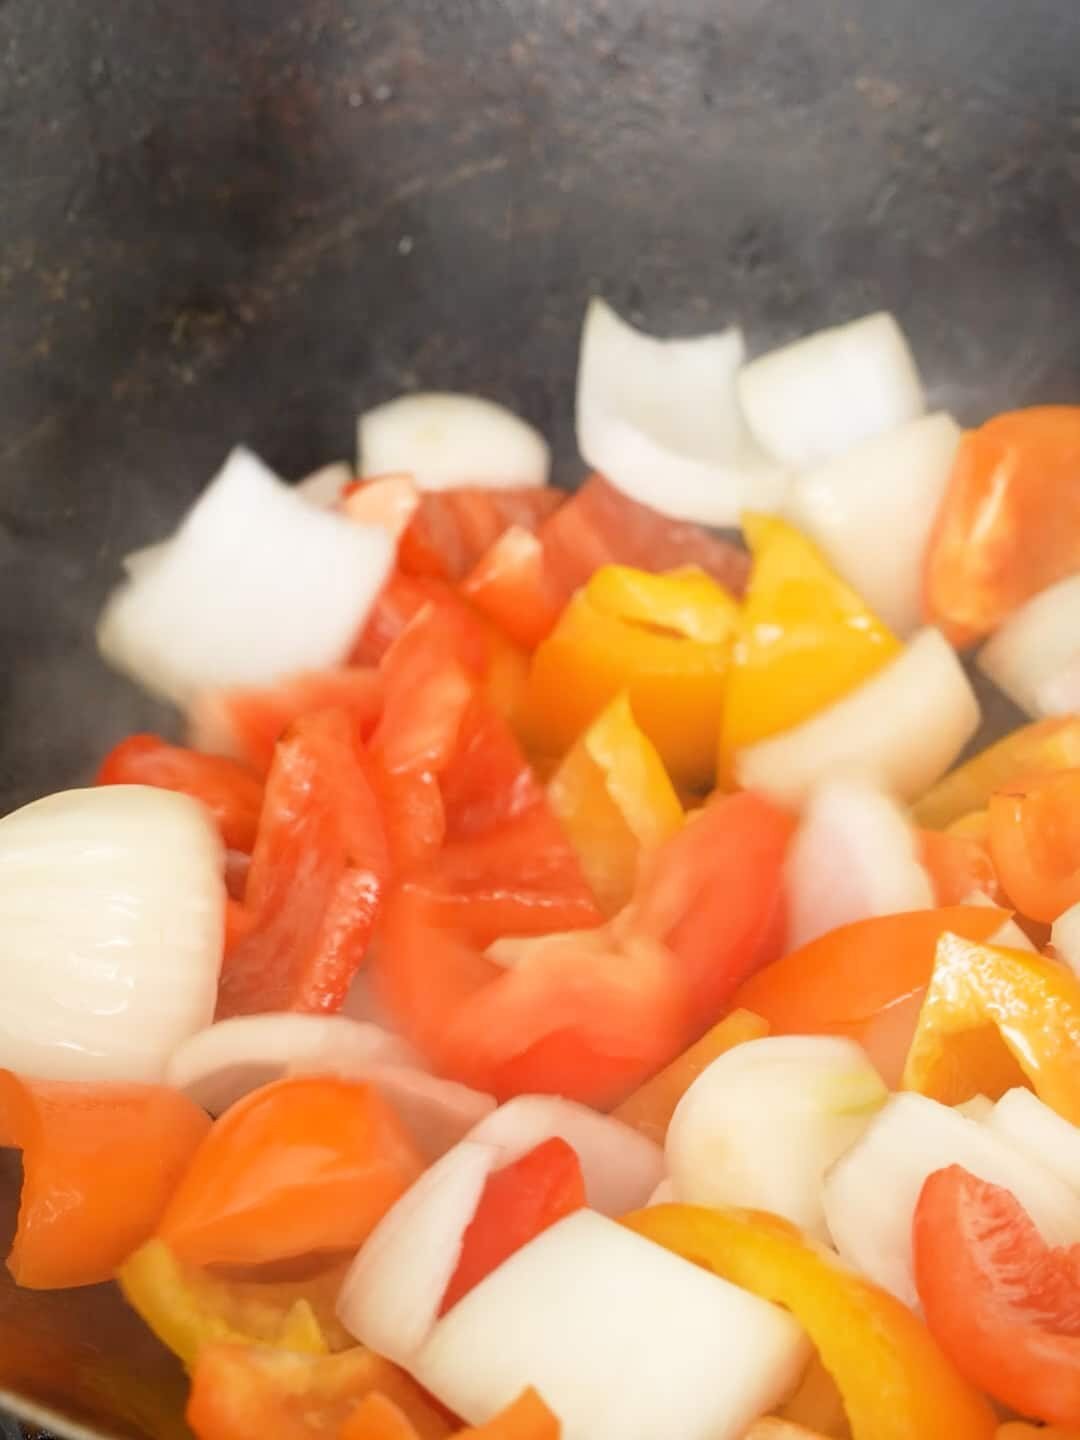 Bell peppers and onions cooking in a wok.